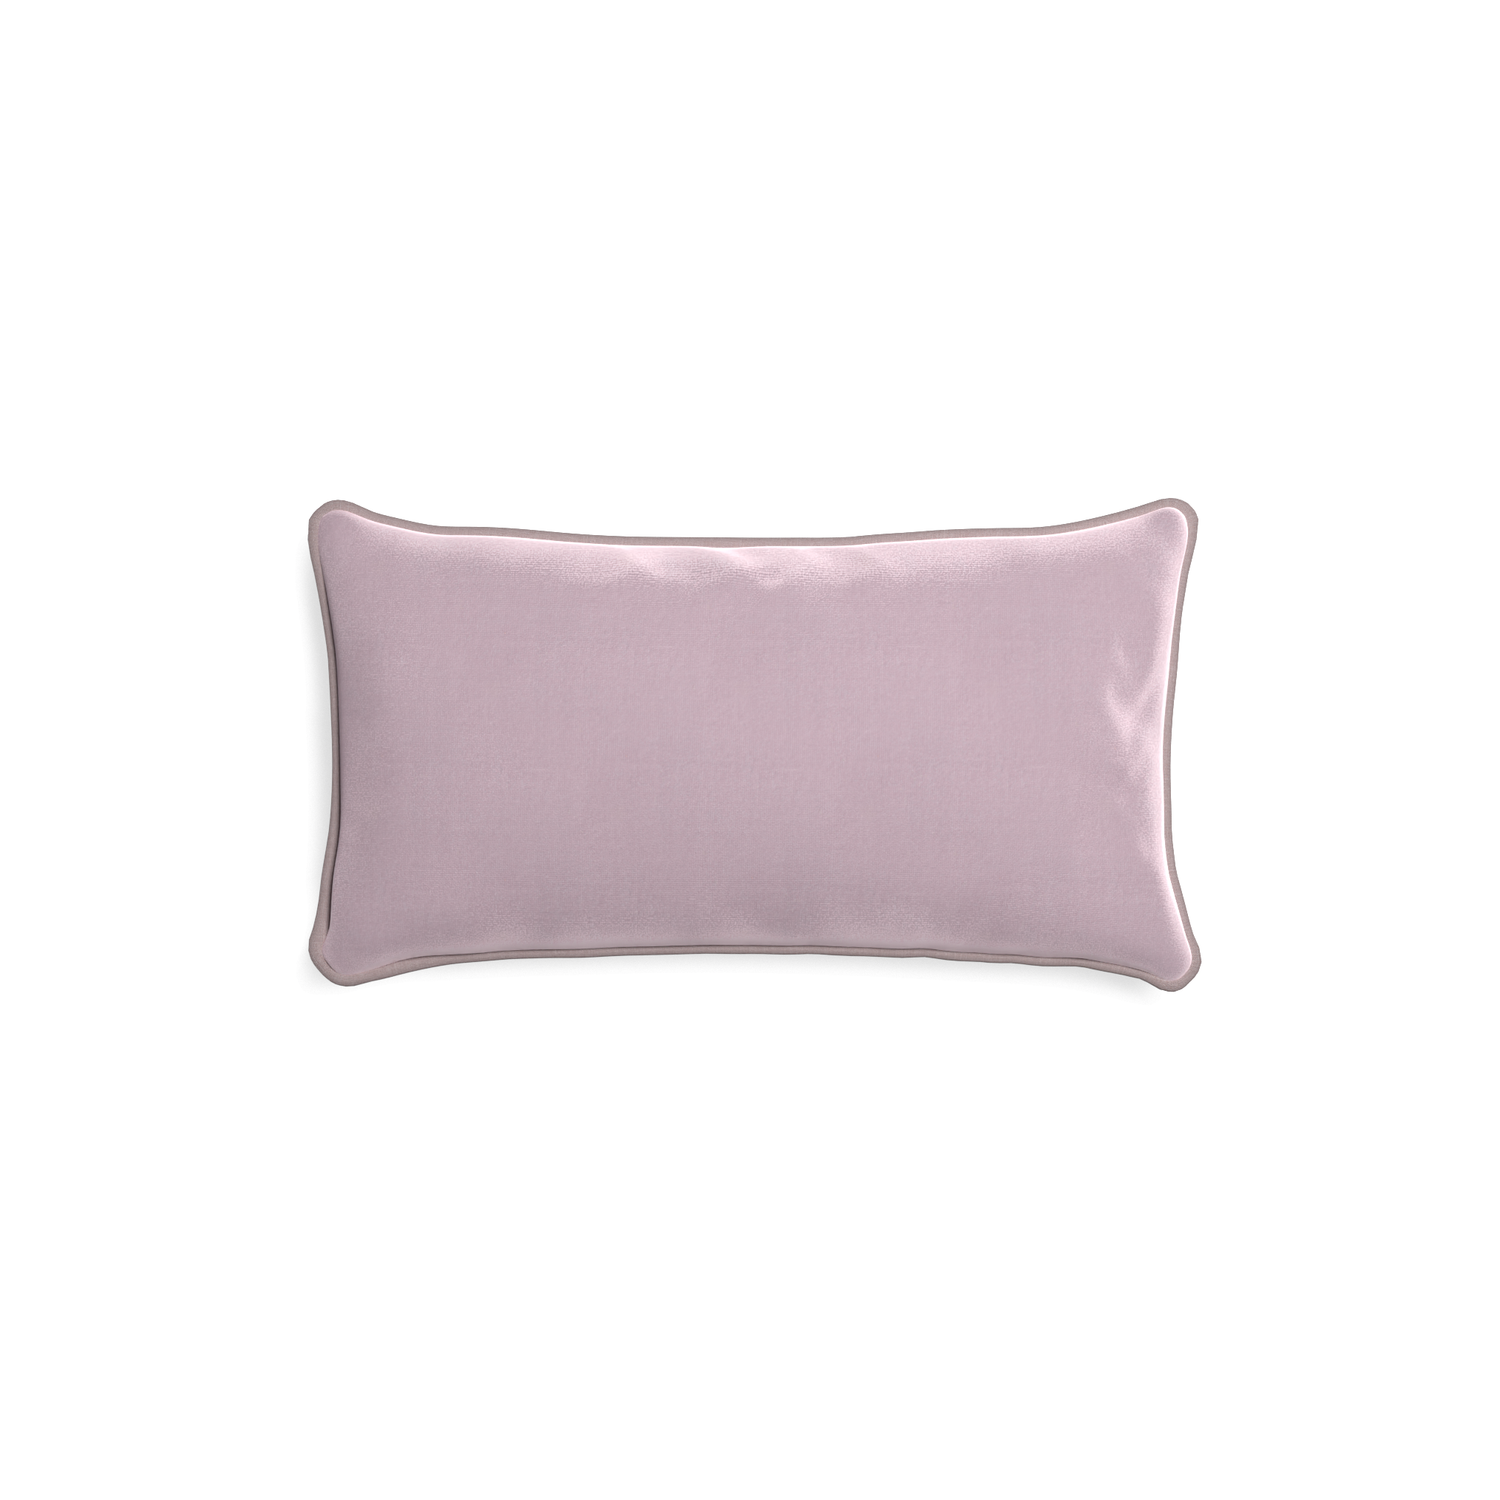 Petite-lumbar lilac velvet custom lilacpillow with orchid piping on white background